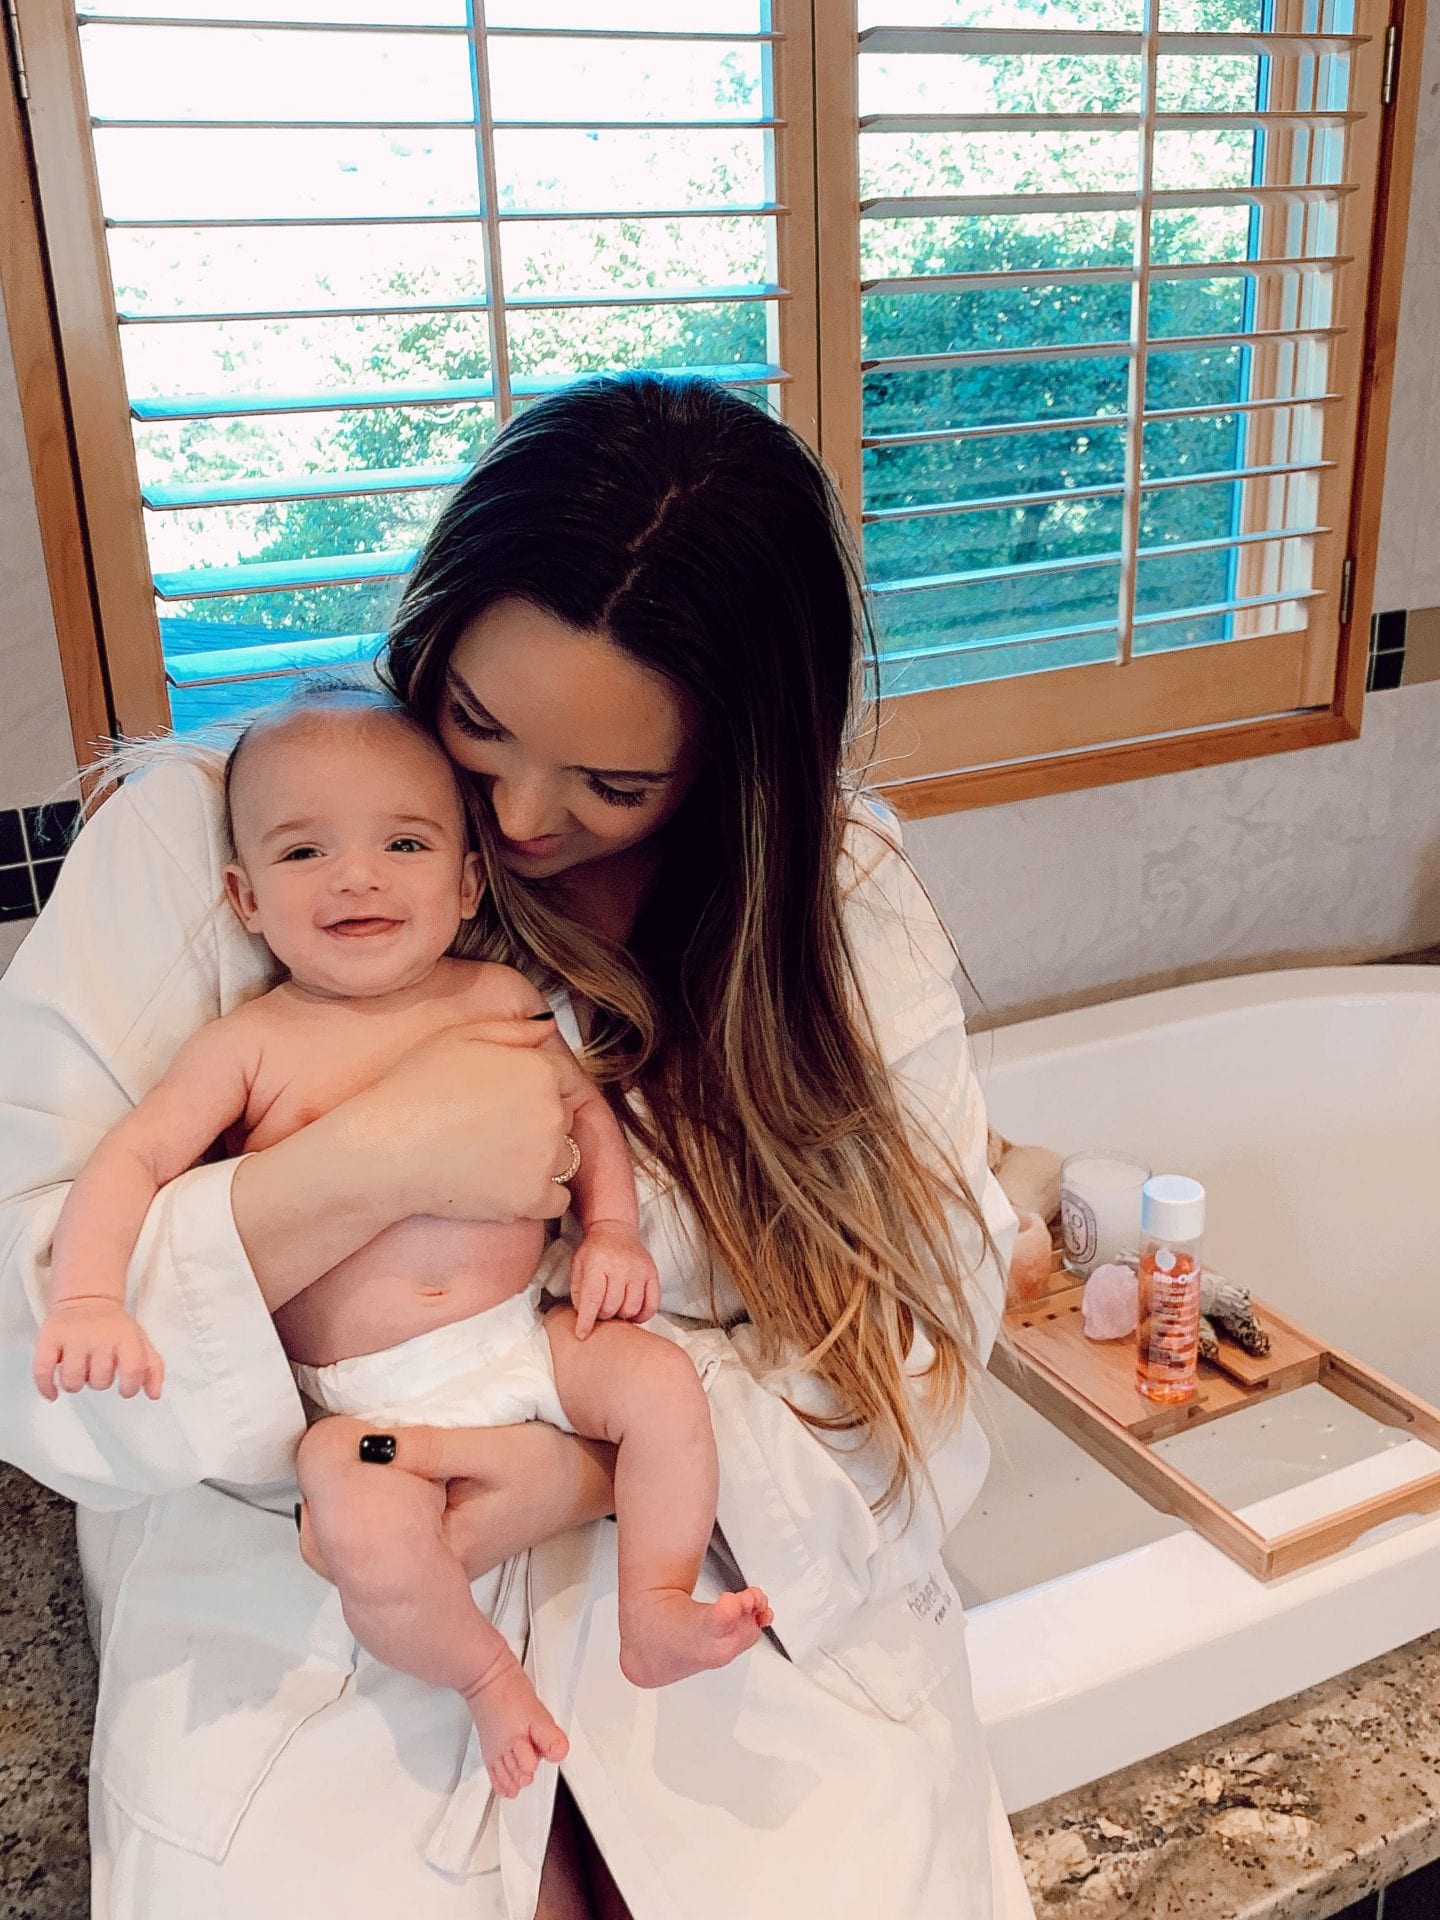 Bio Oil for Stretch Marks by popular San Francisco lifestyle blog, Just Add Glam: image of a mom wearing a white bathrobe and sitting on the edge of her tub while holding her baby.  